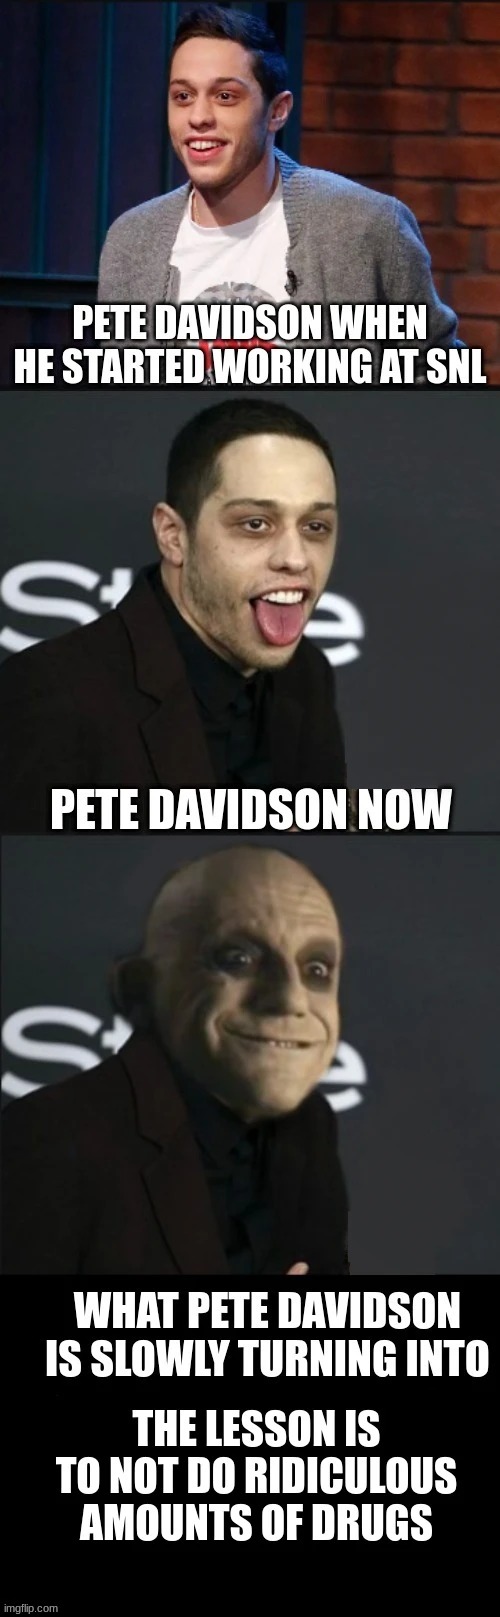 Pete Davidson is  turning into Uncle Fester | image tagged in pete davidson,snl,saturday night live,funny,addams family,addams family uncle fester | made w/ Imgflip meme maker